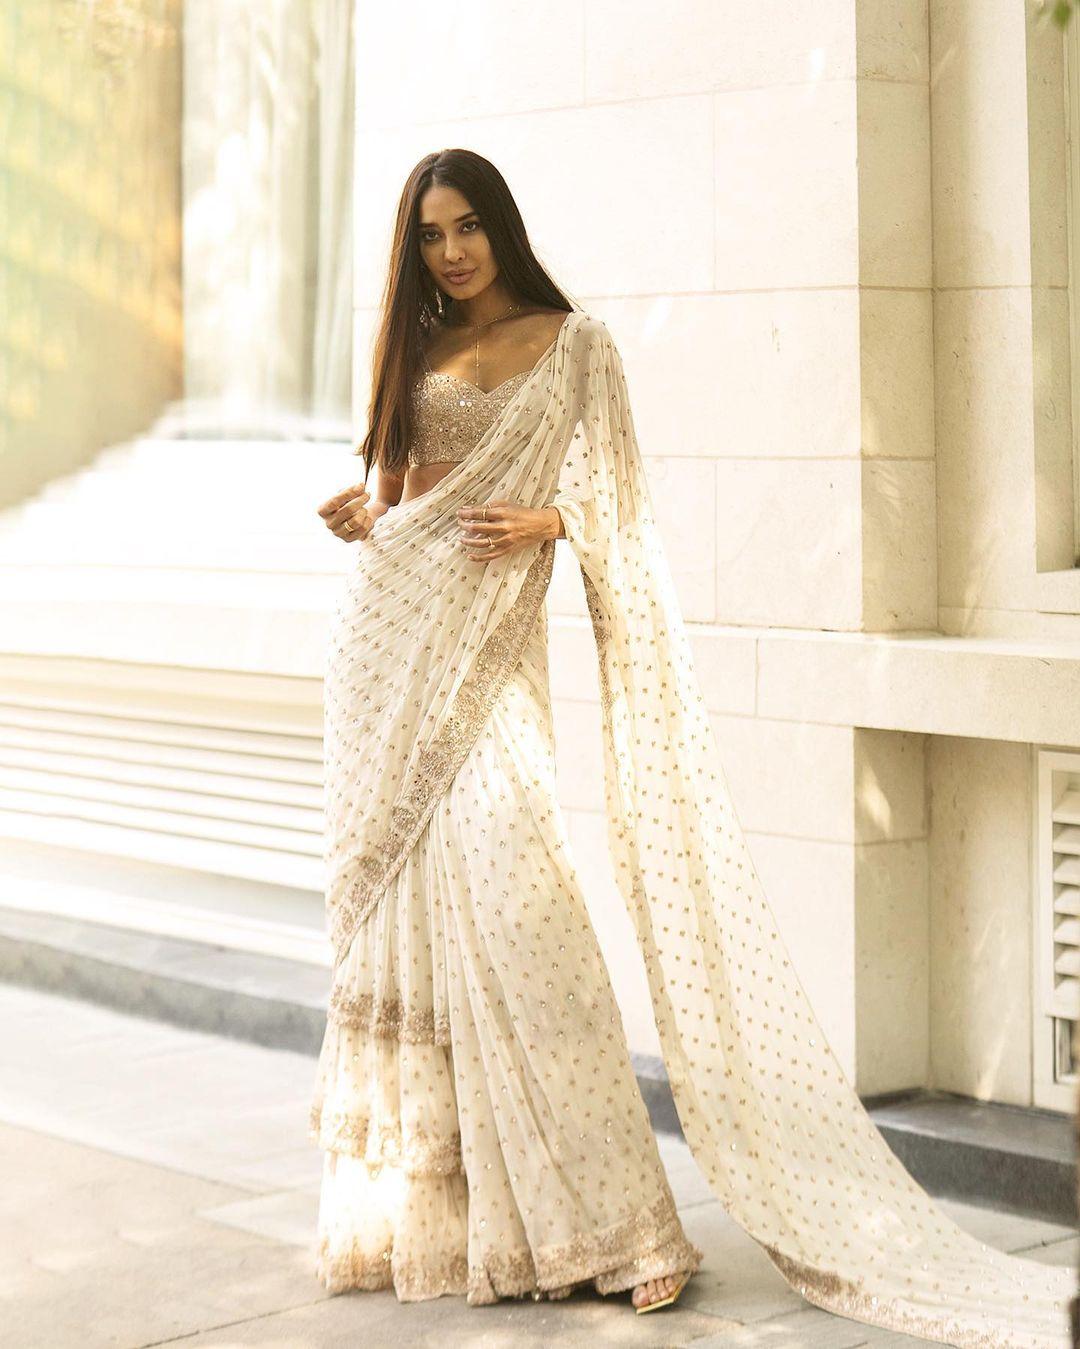 Lisa Haydon epitomizes ethereal beauty in a white saree adorned with a glittery silver blouse by Arpita Mehta.